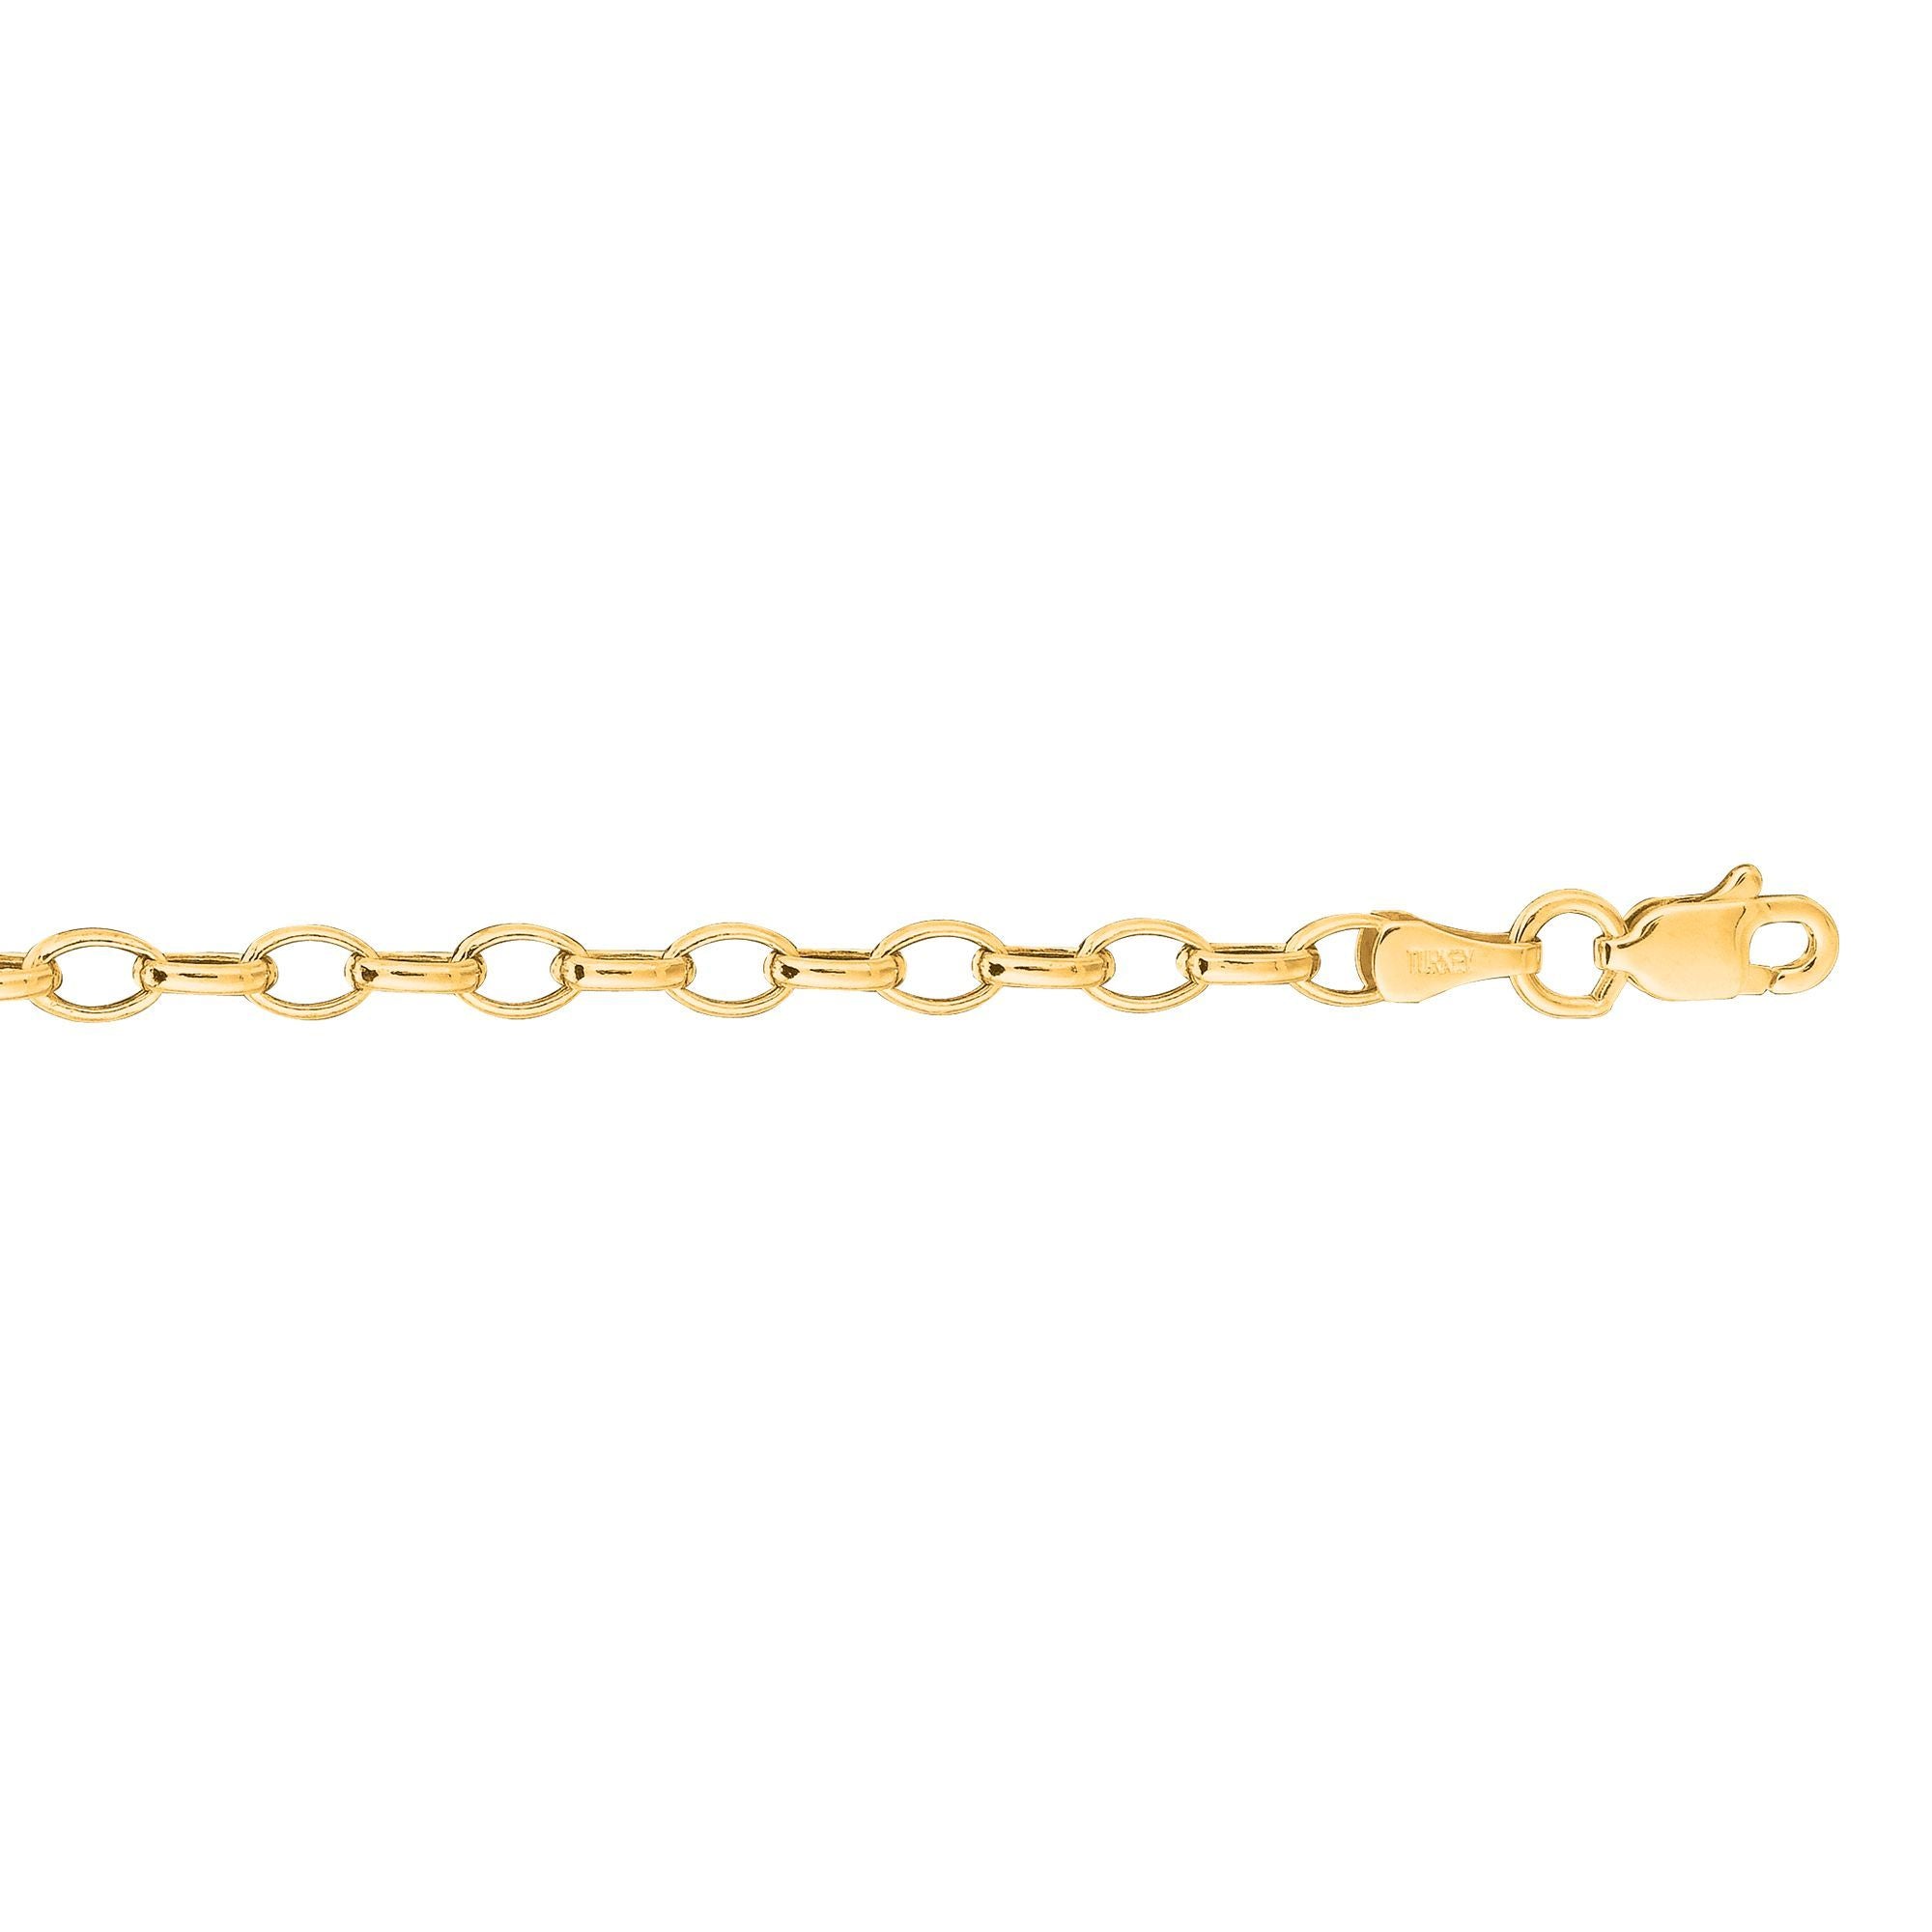 Minimalist Solid Gold Lite Oval Rolo Chain with Lobster Clasp - wingroupjewelry